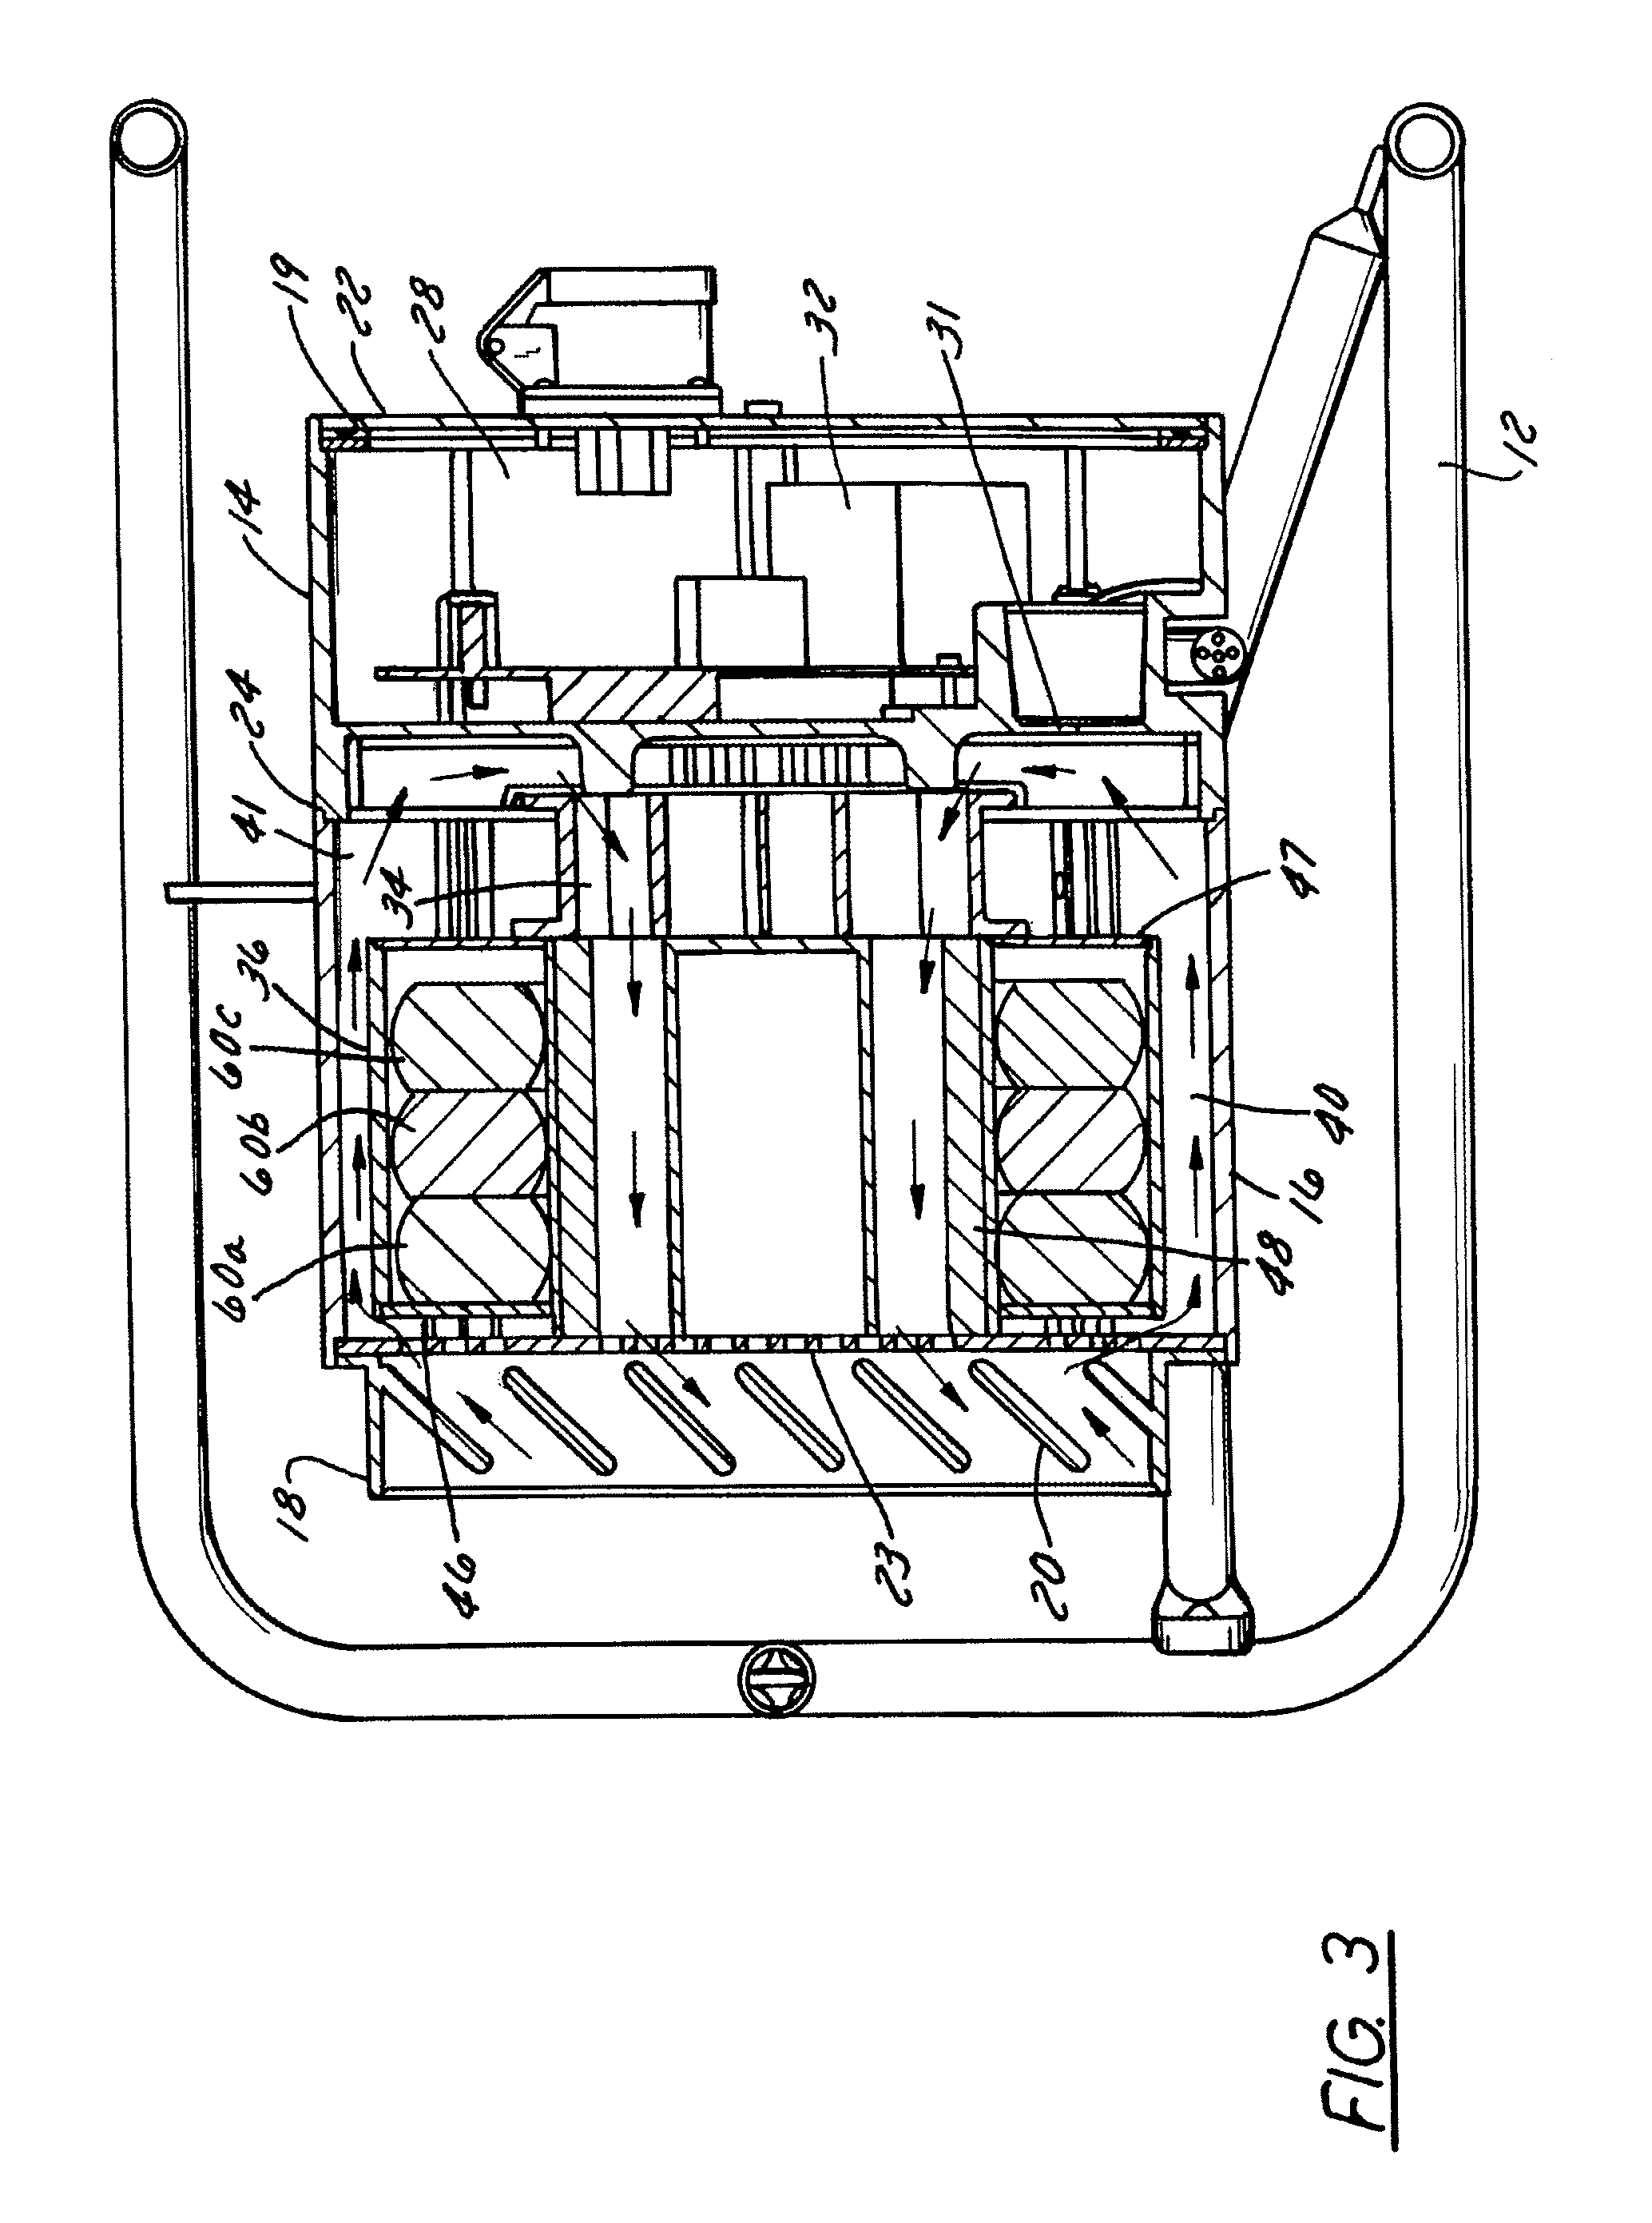 Frequency converter with fan cooling